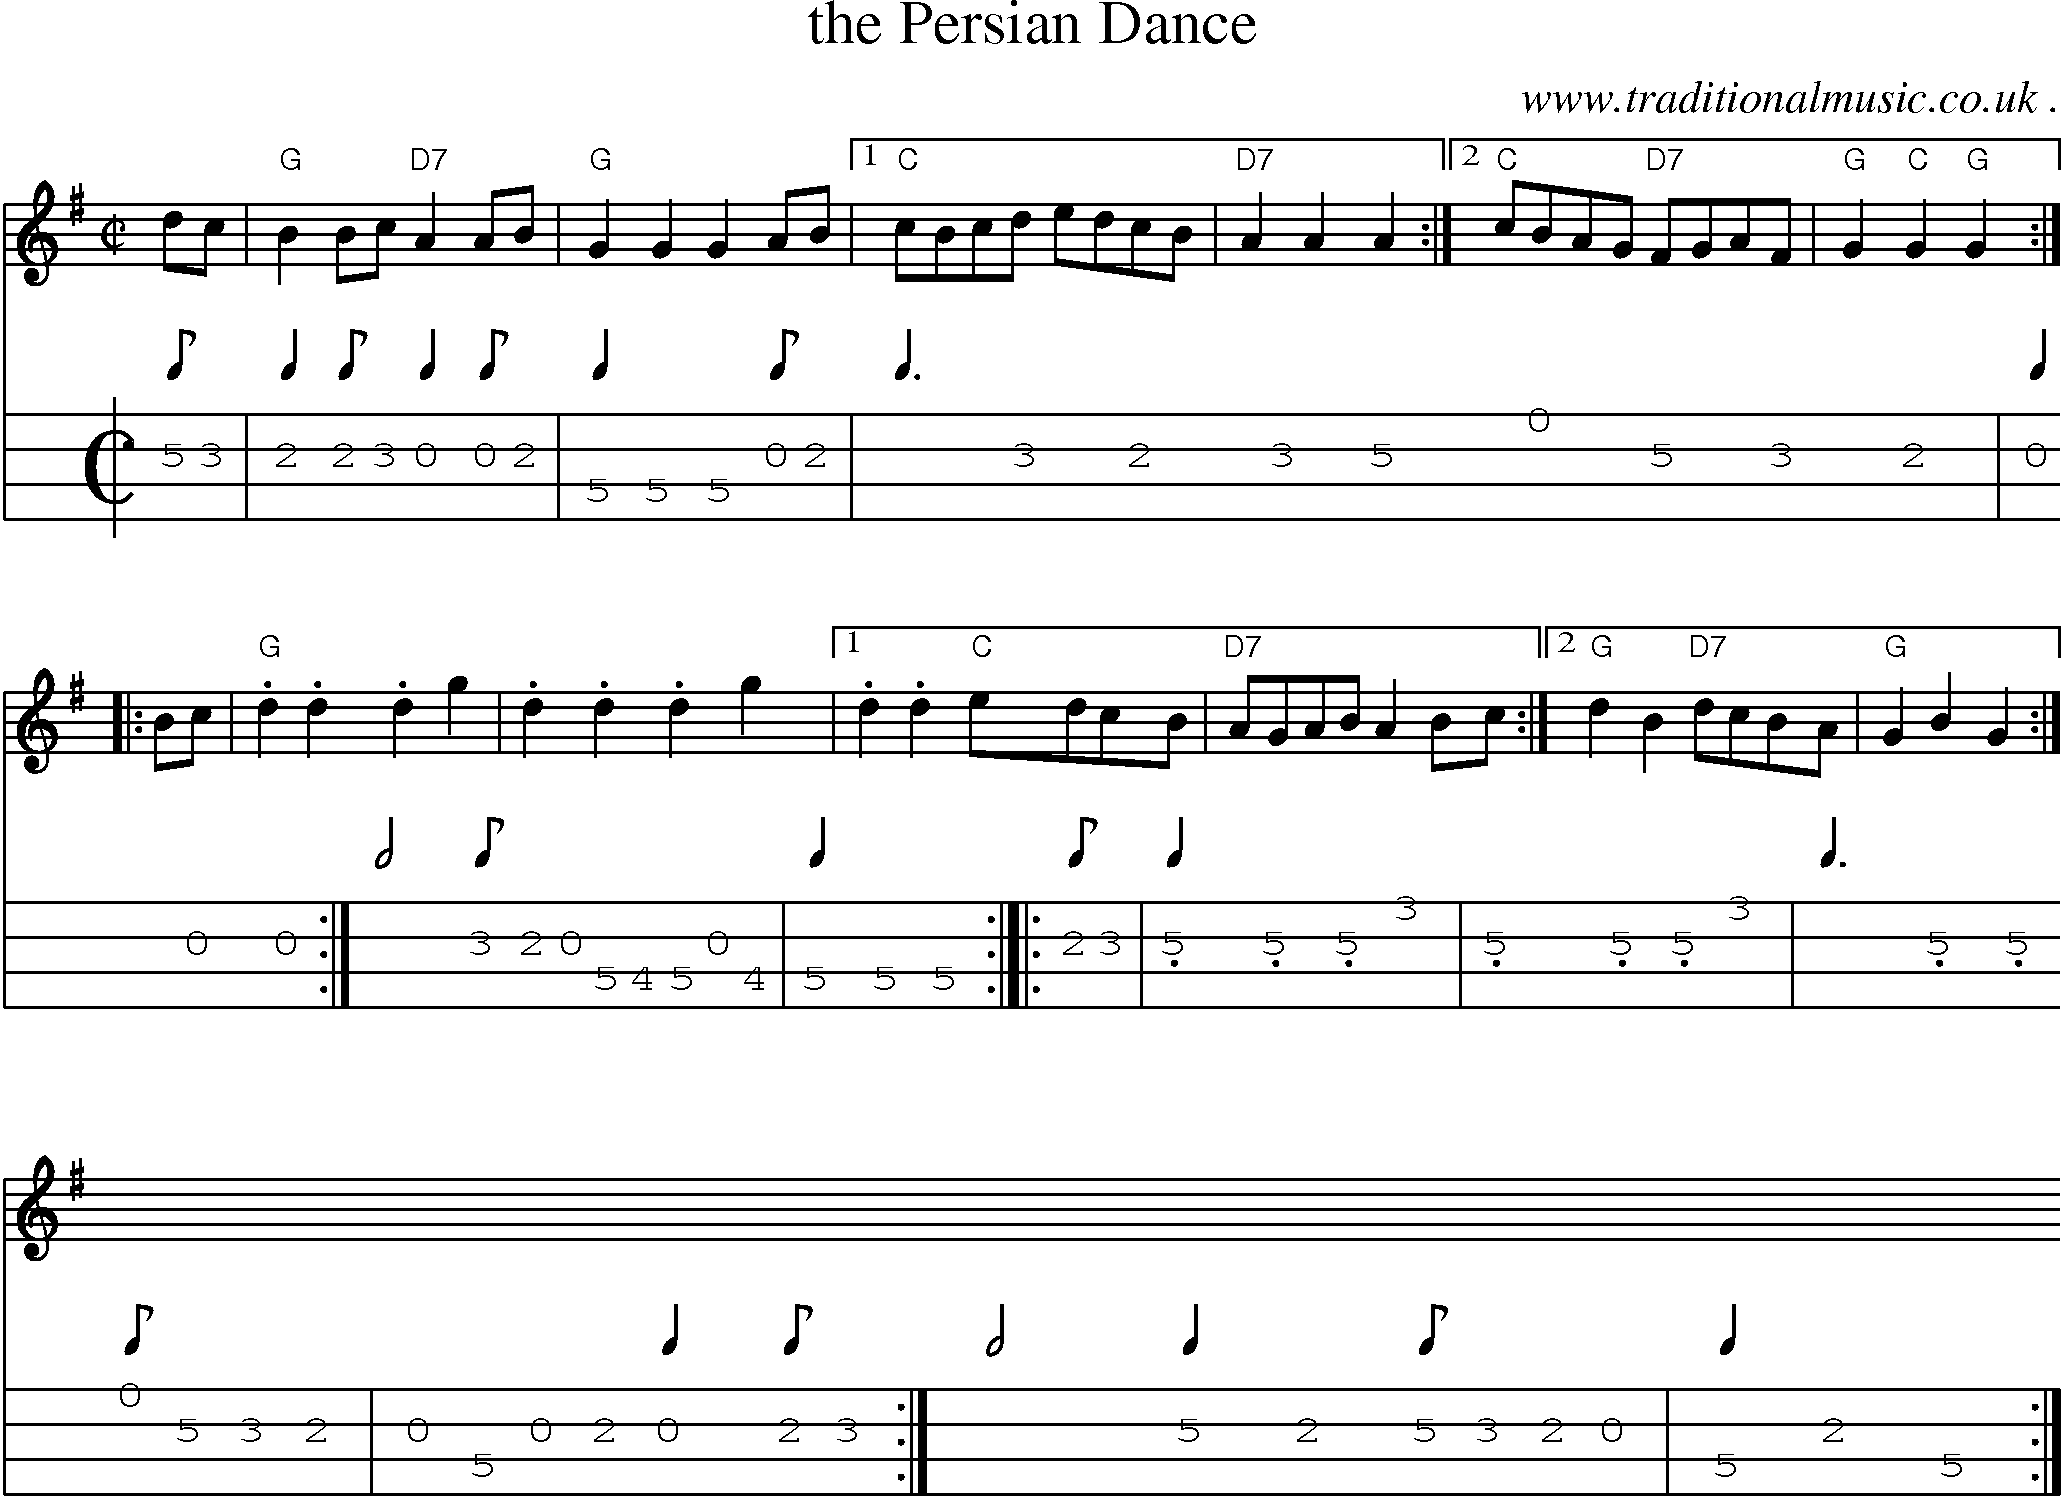 Sheet-music  score, Chords and Mandolin Tabs for The Persian Dance